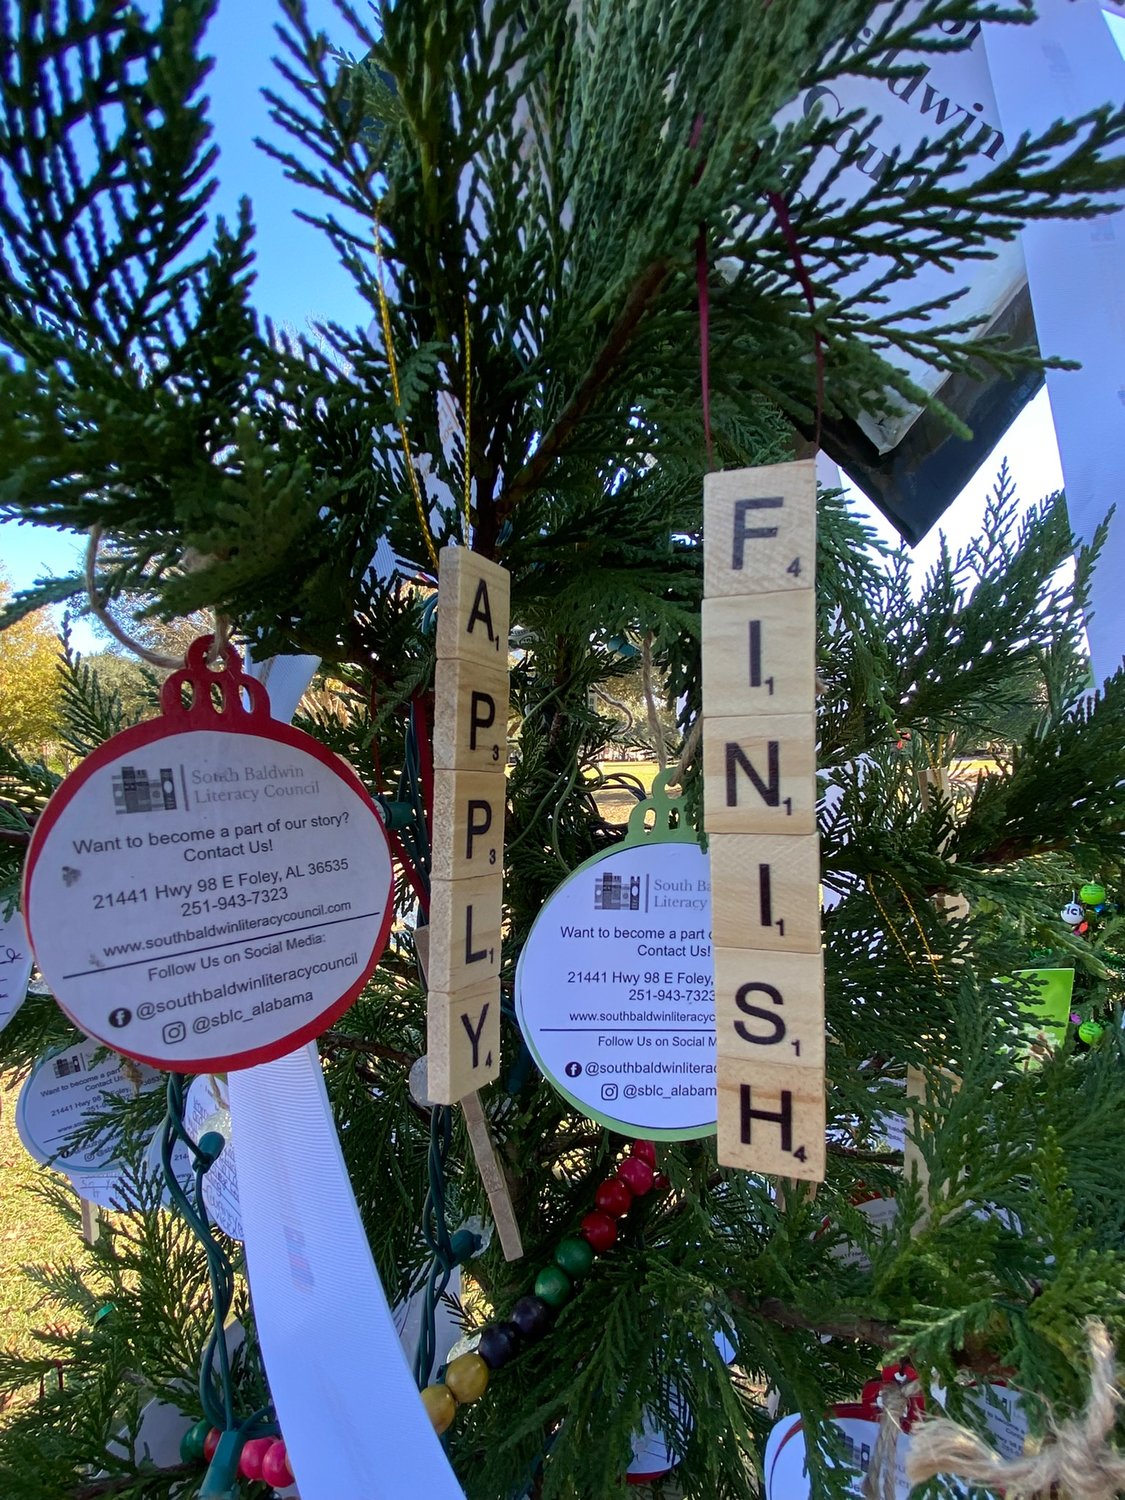 South Baldwin Literacy Council's tree holds ornaments from students with what they like learning about.